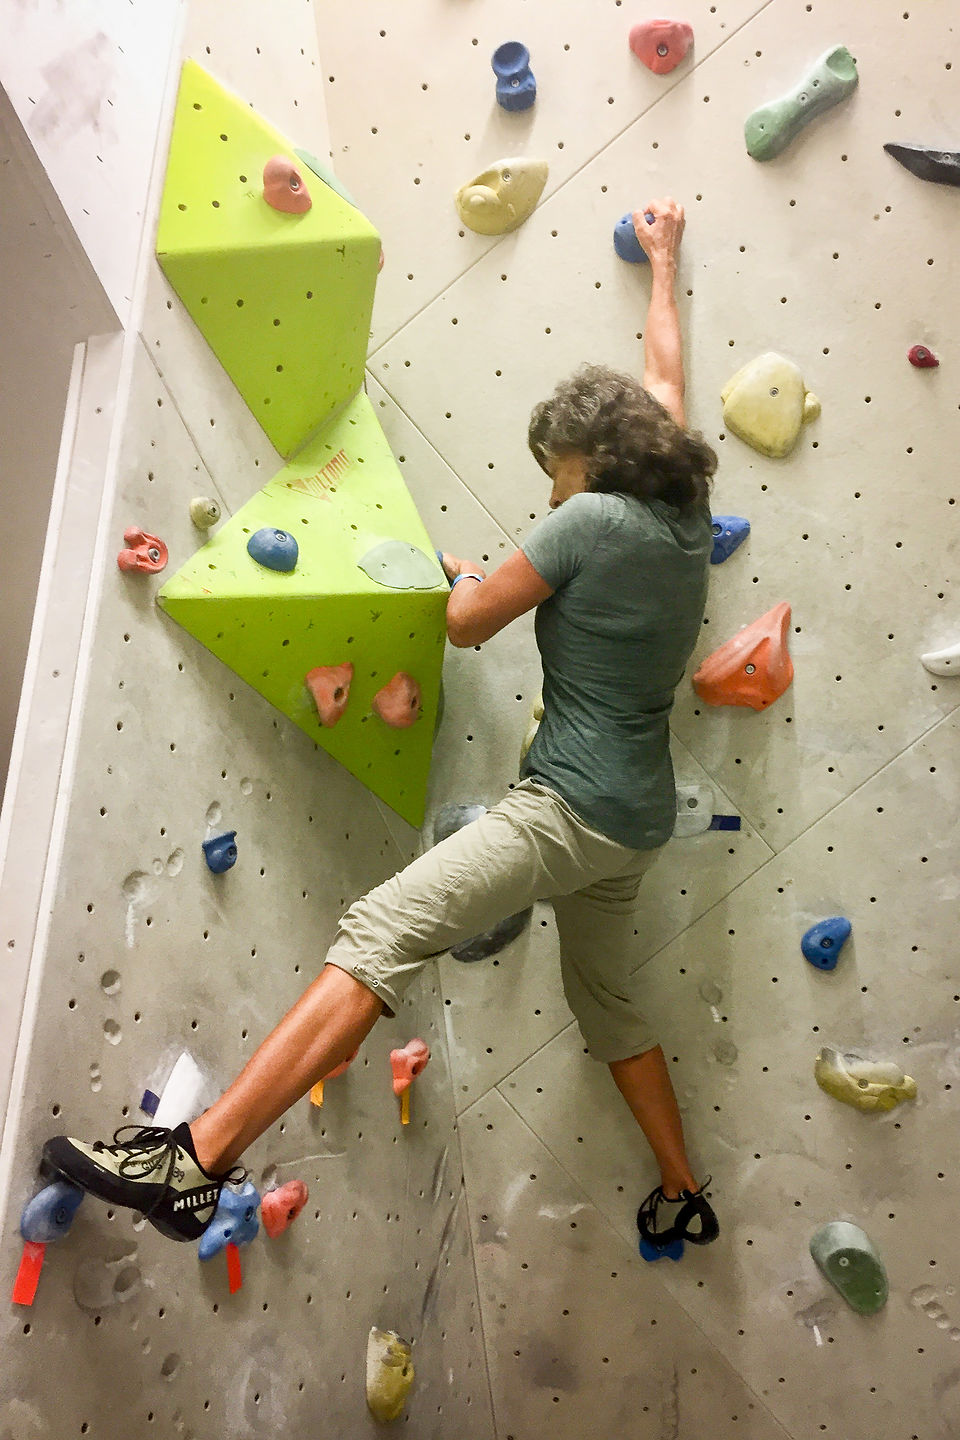 Lolo climbing at the Grindelwald Sportzentrum